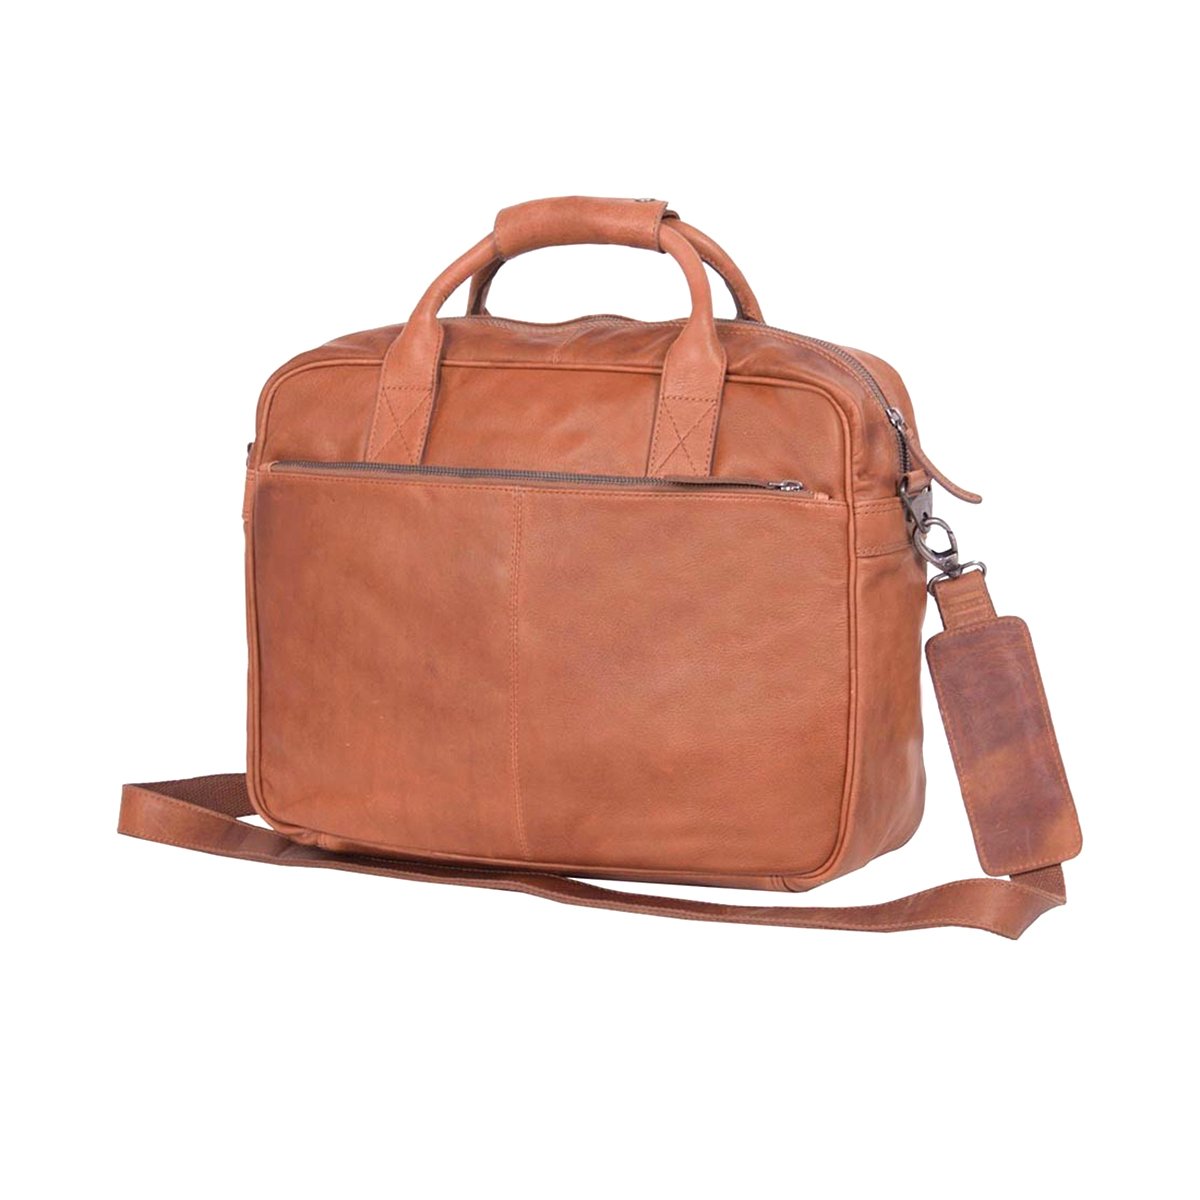 Designer Leather Briefcase Top Laptop Bags For Men And Women 38cm Computer  Bag With Options, Luxury Shoulder Strap And Versatile Handbag Design  2306302BF From Imstrong_store, $69.44 | DHgate.Com